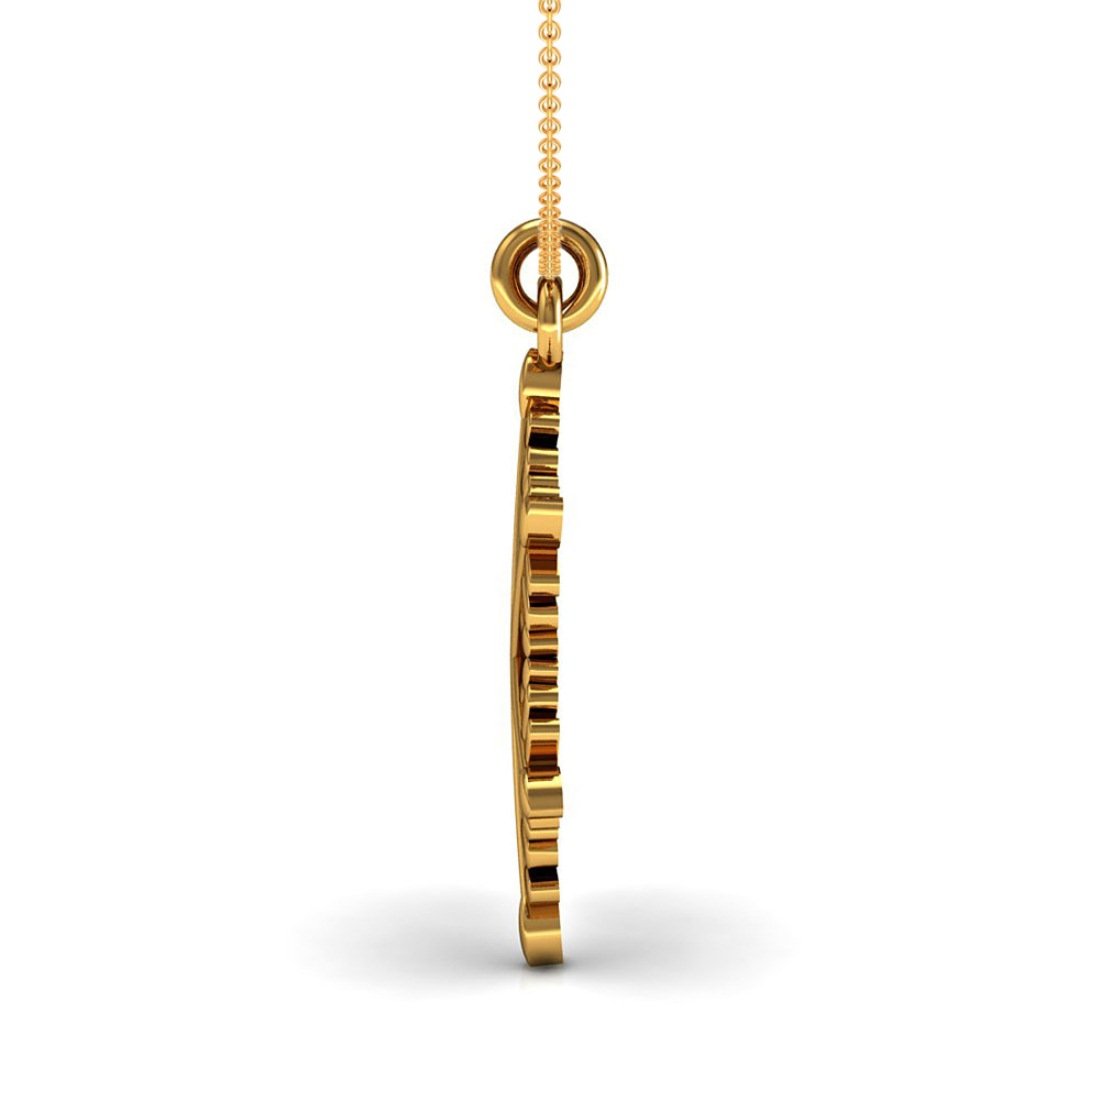 Solid gold kids pendant